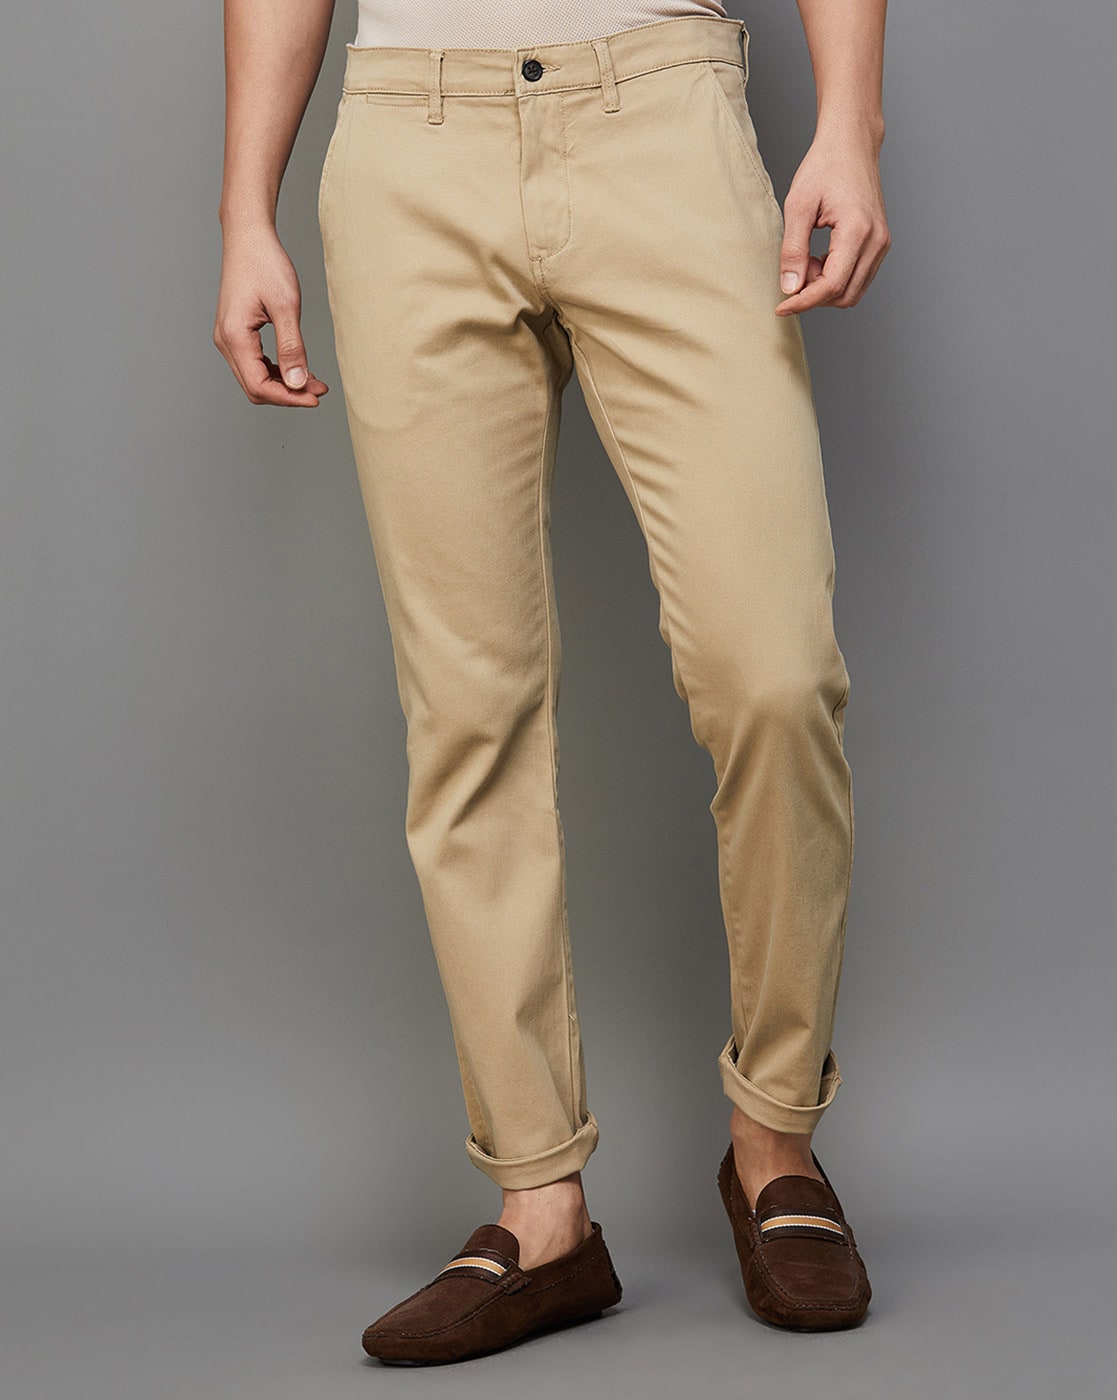 Buy Mens Trousers Online India, Mens Pants Online India, Trousers for Men –  ottostore.com